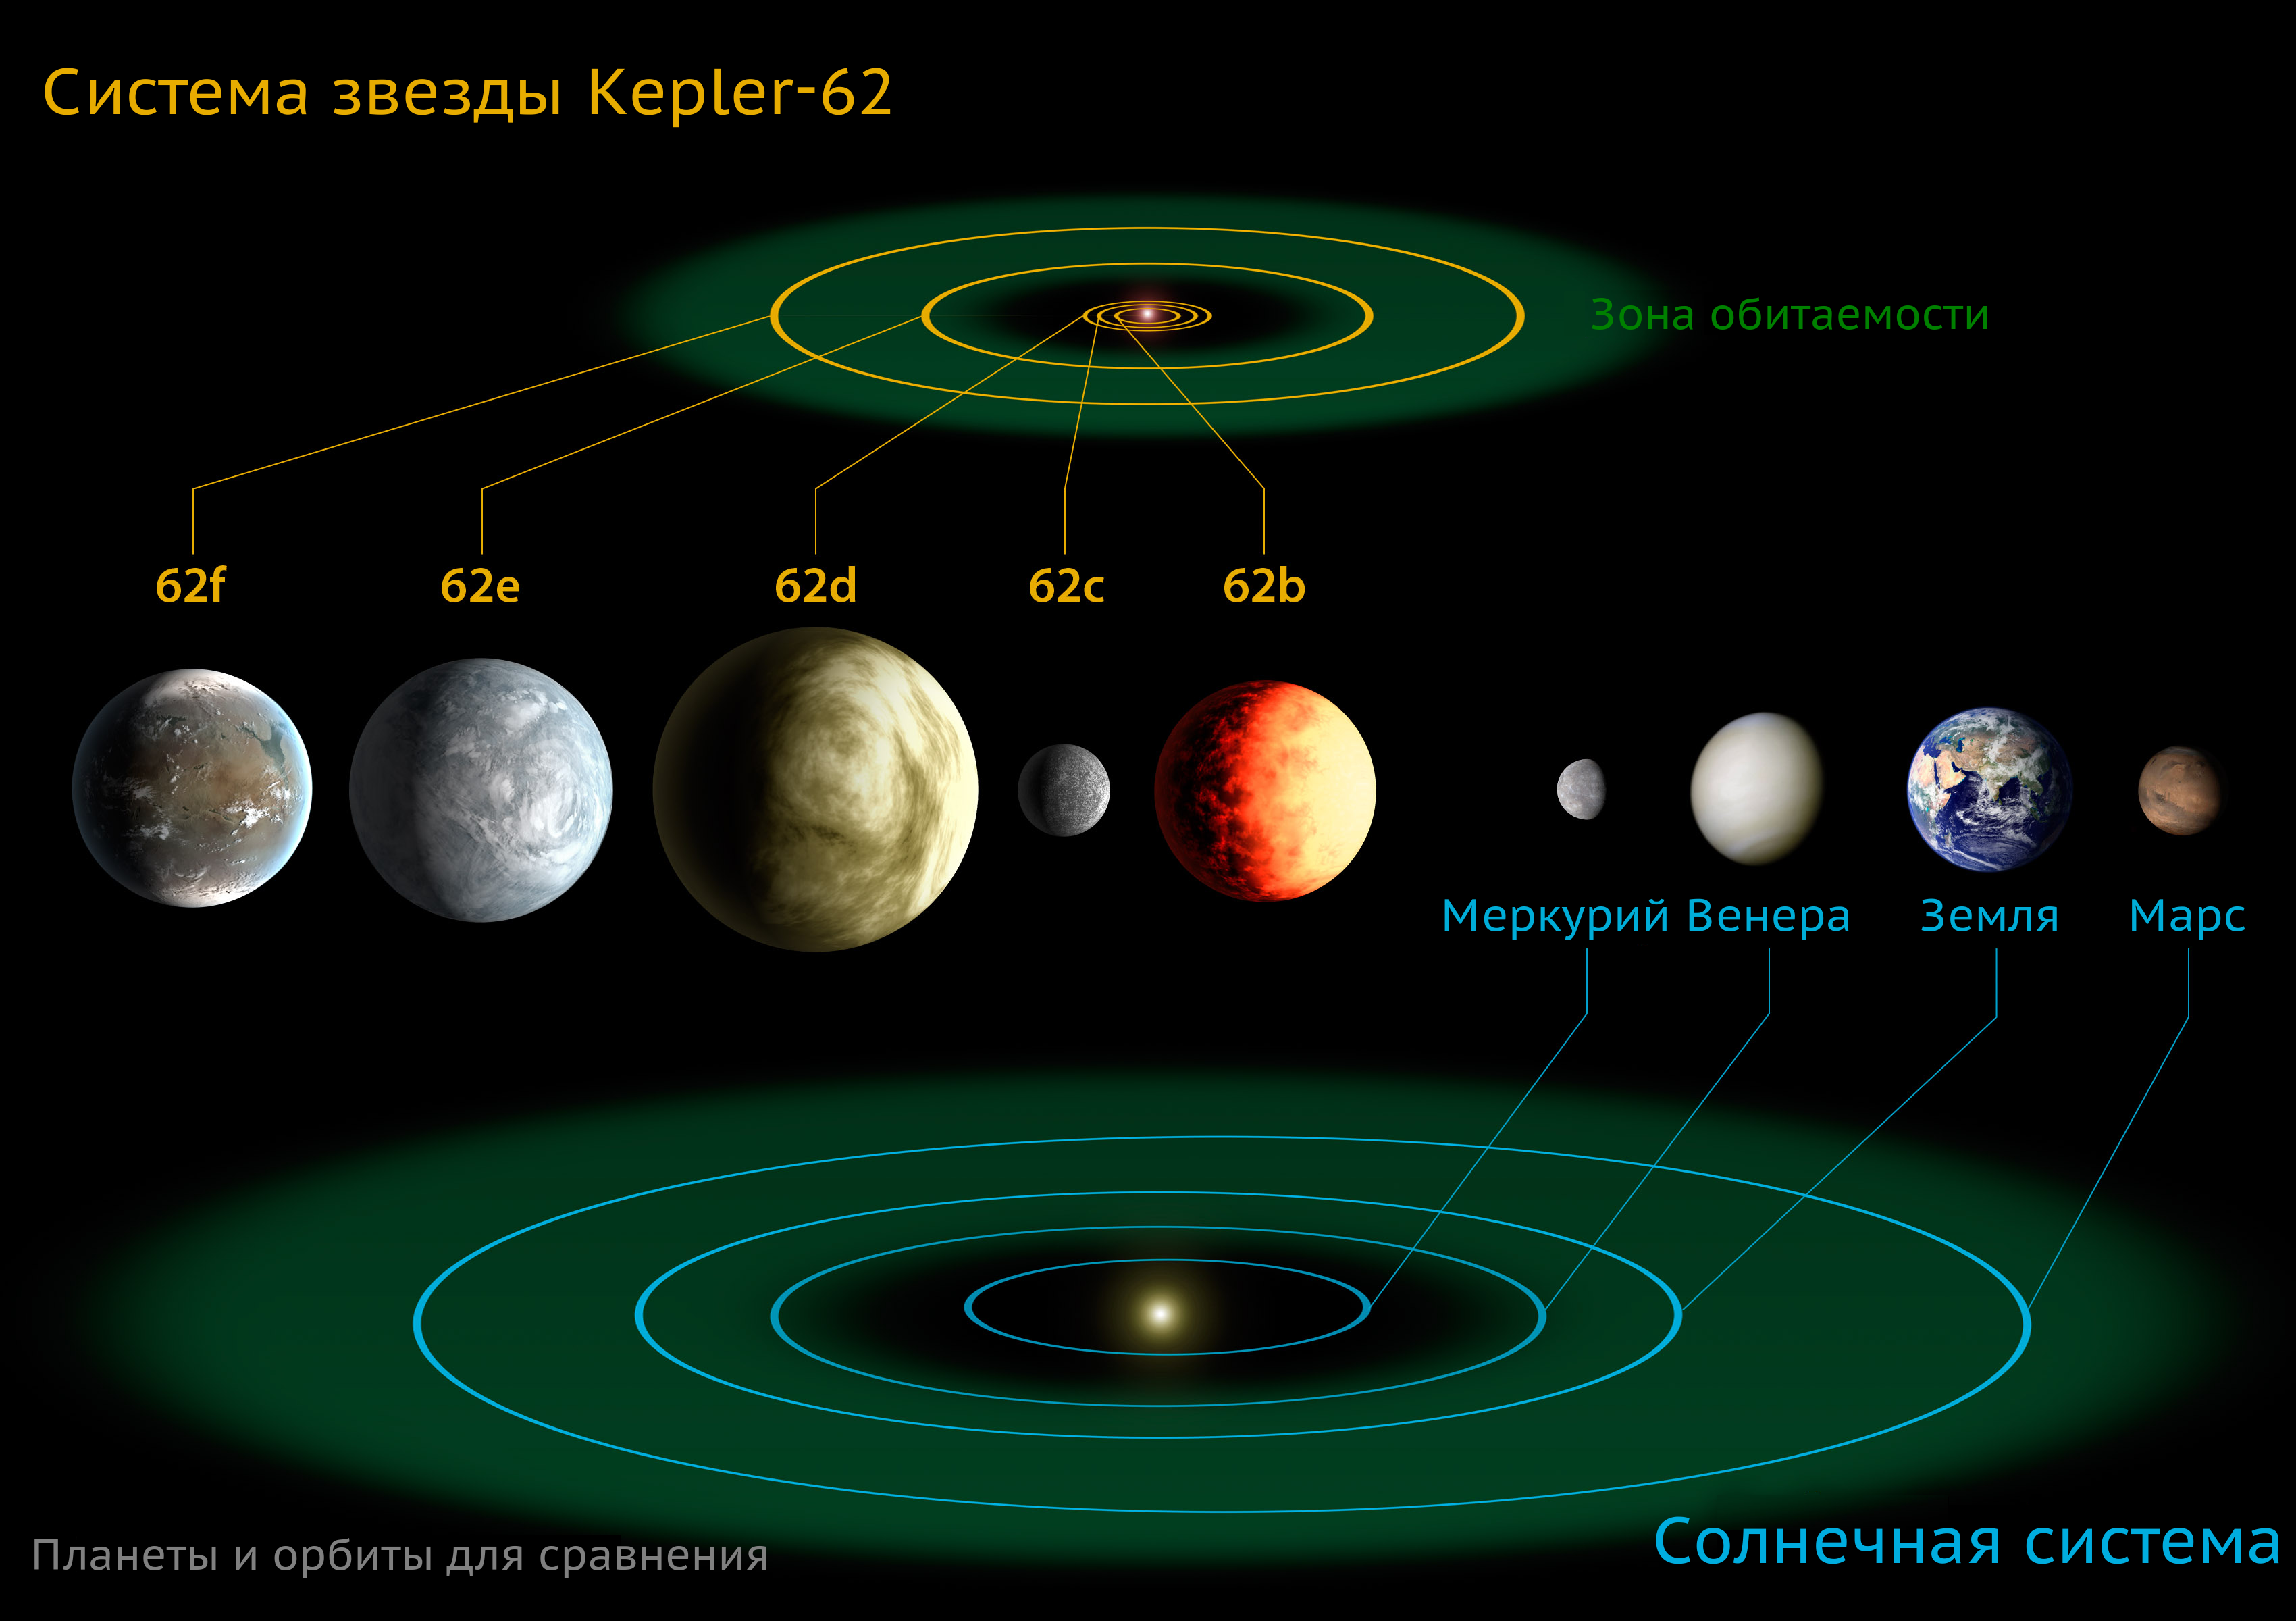 The diagram compares the planets of the inner solar system to Kepler-62 rus.png